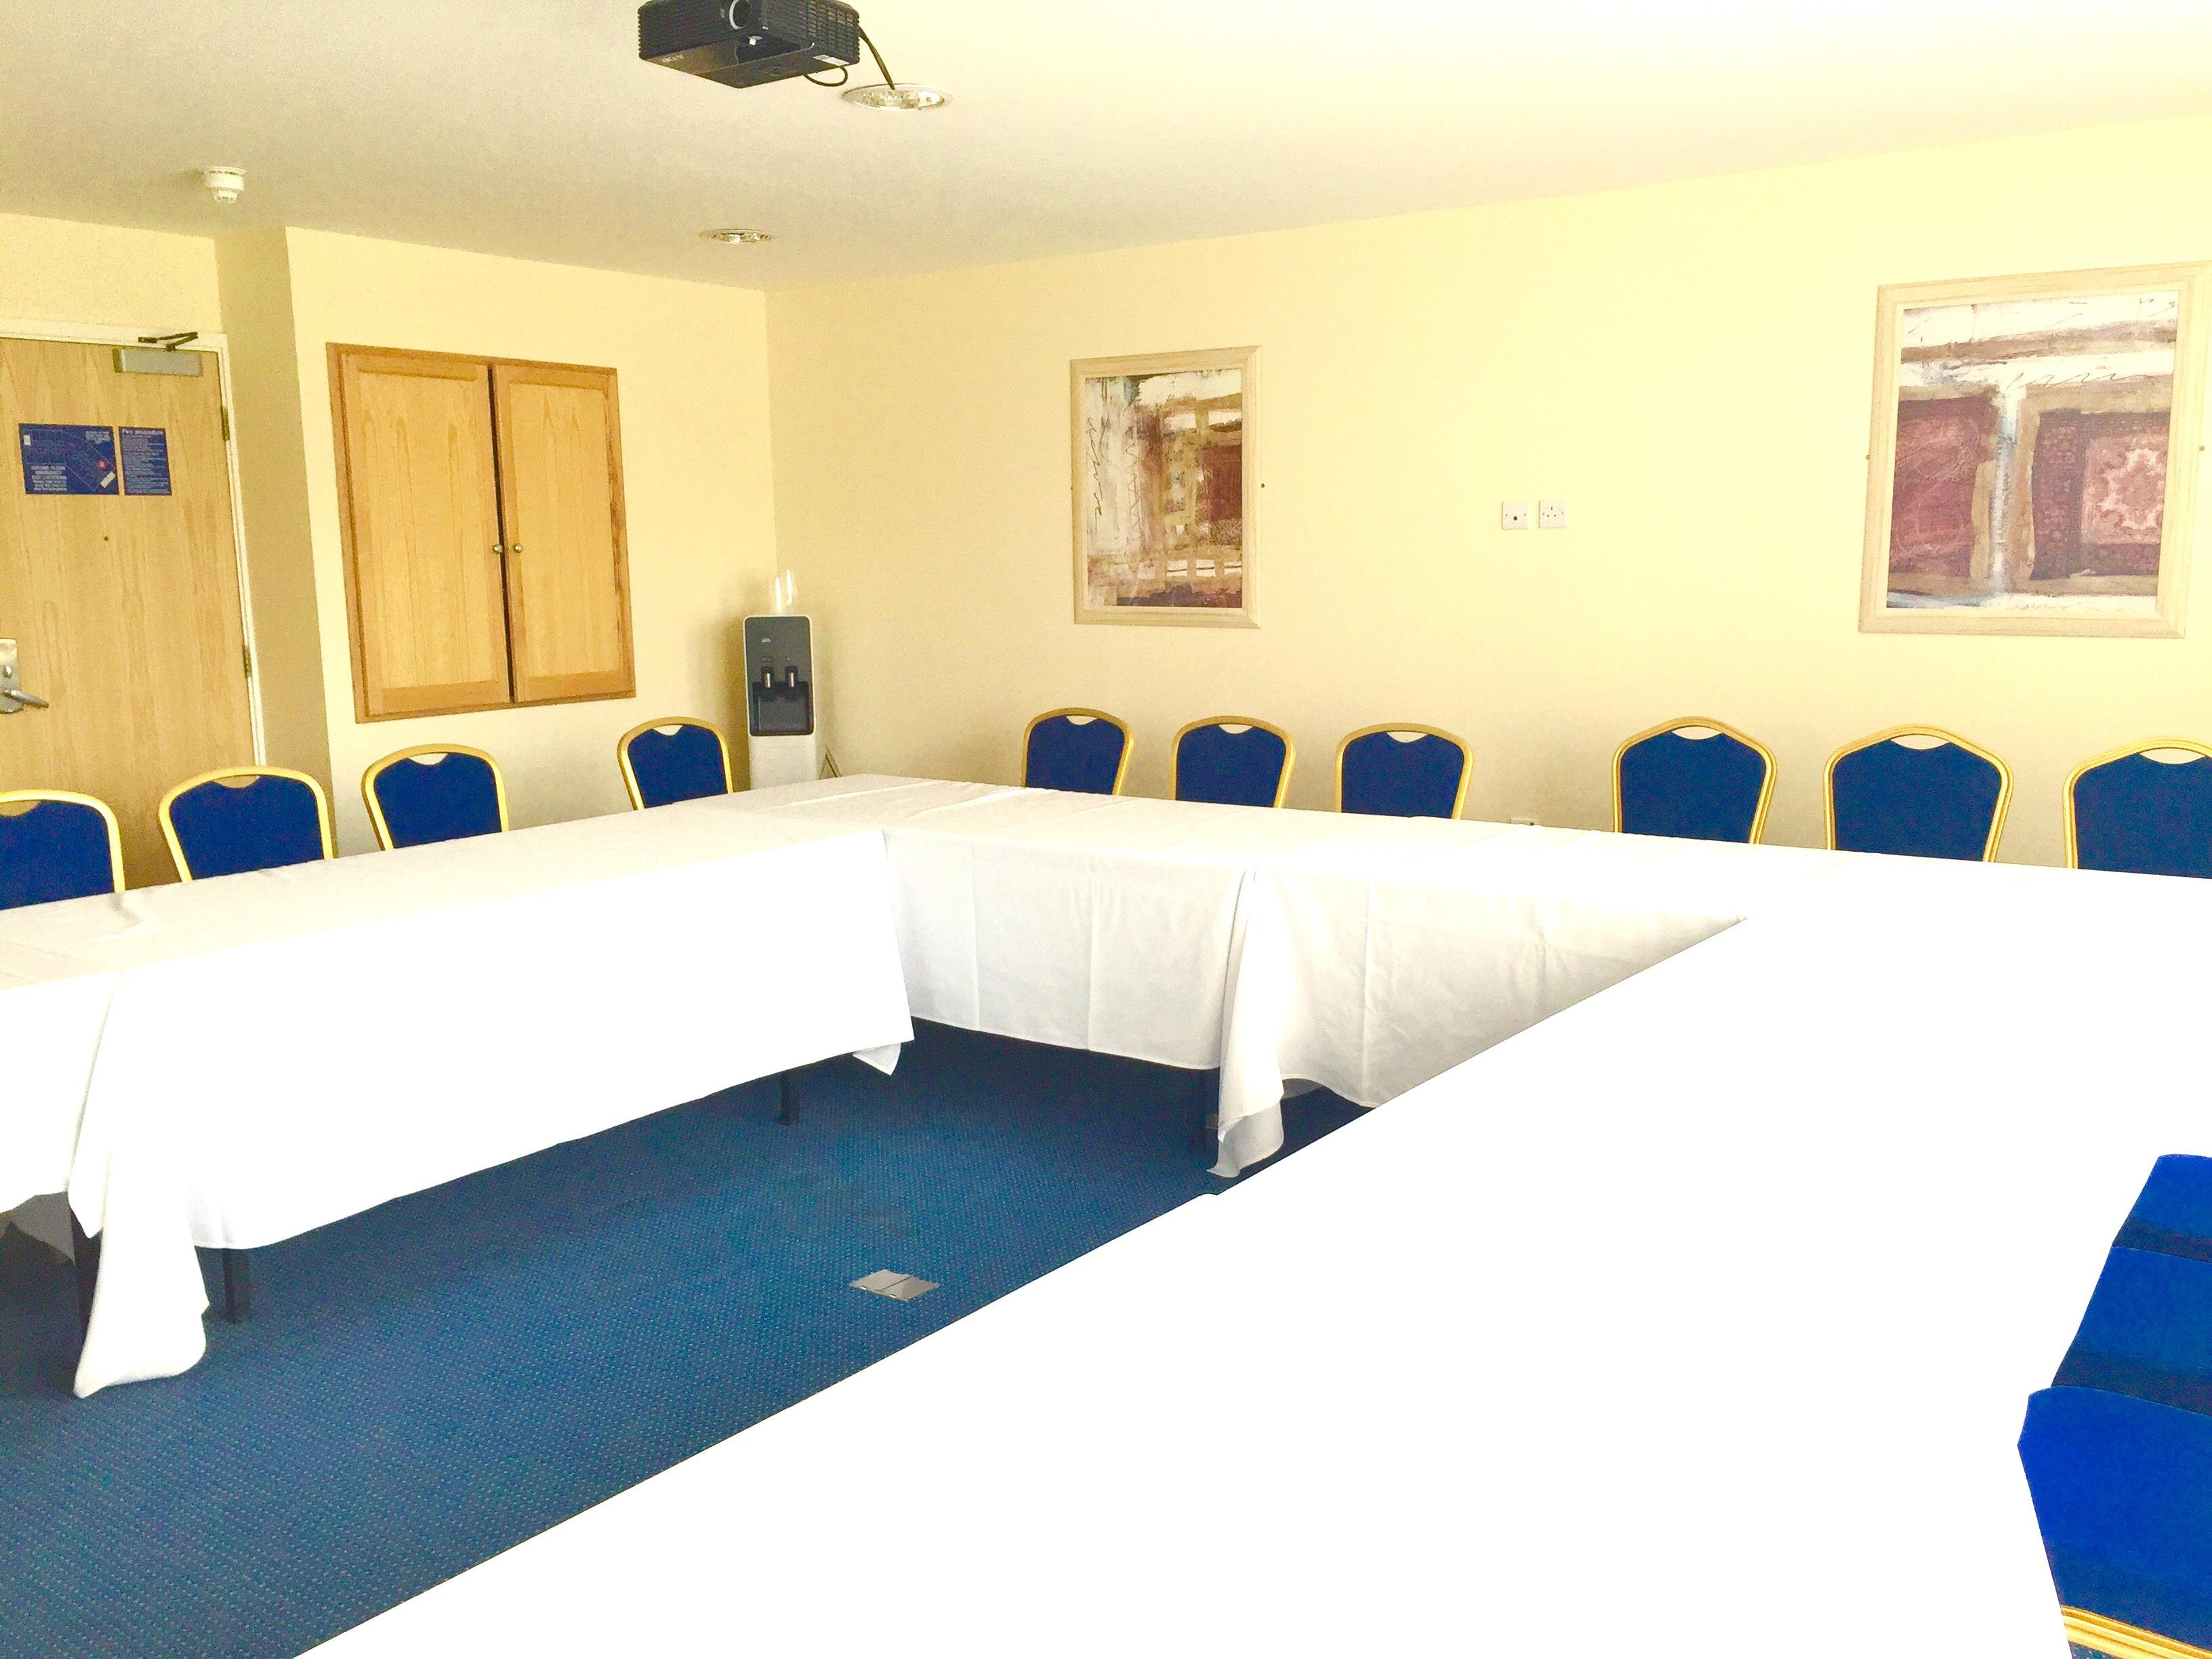 The Fairway Meeting Room, The Fairway And Bluebell Banqueting Suite photo #1